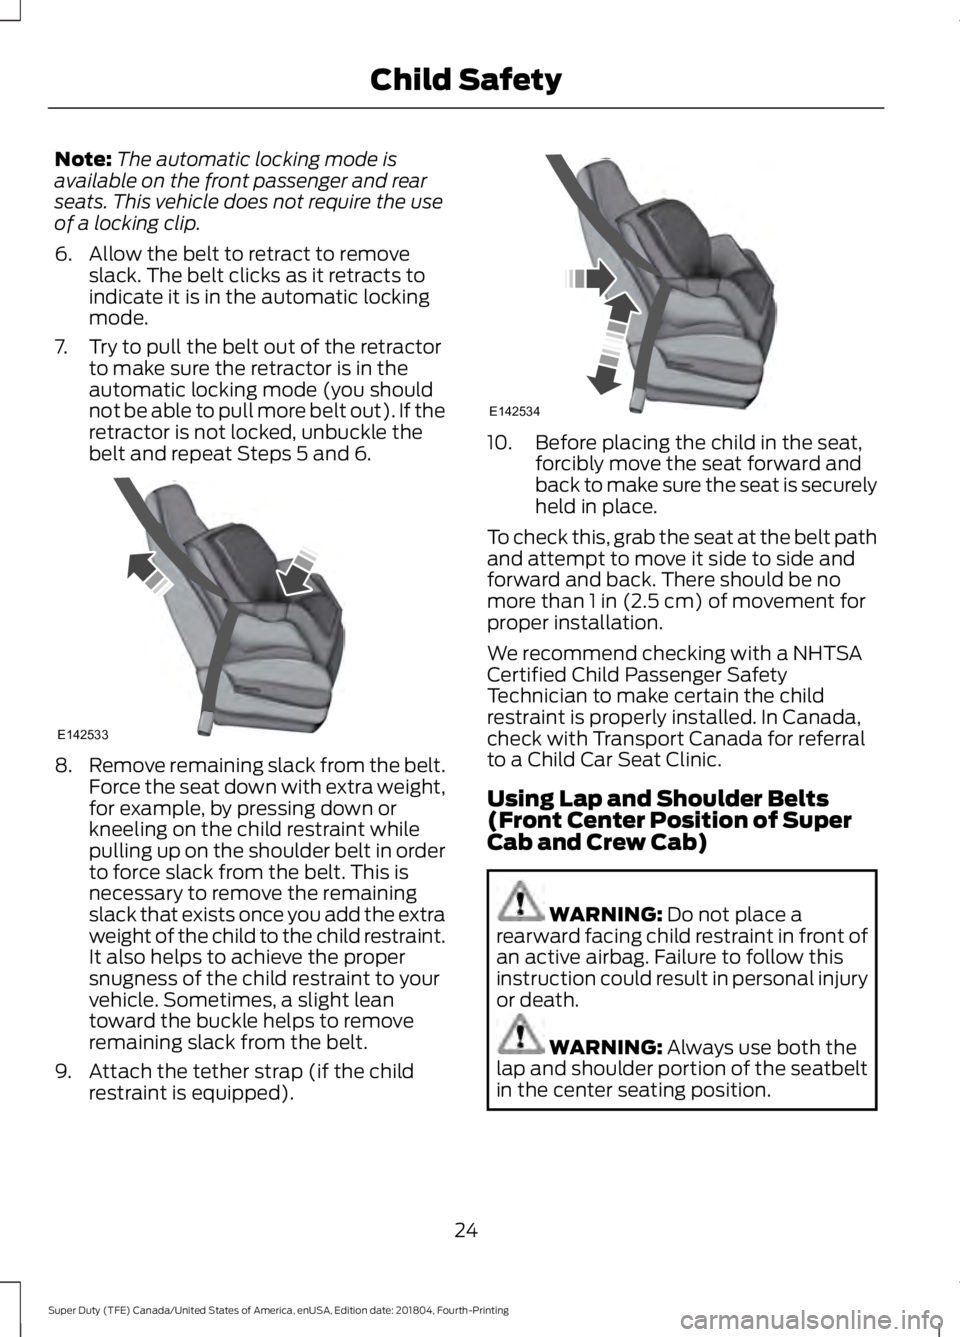 FORD F-250 2019  Owners Manual Note:
The automatic locking mode is
available on the front passenger and rear
seats. This vehicle does not require the use
of a locking clip.
6. Allow the belt to retract to remove slack. The belt cli